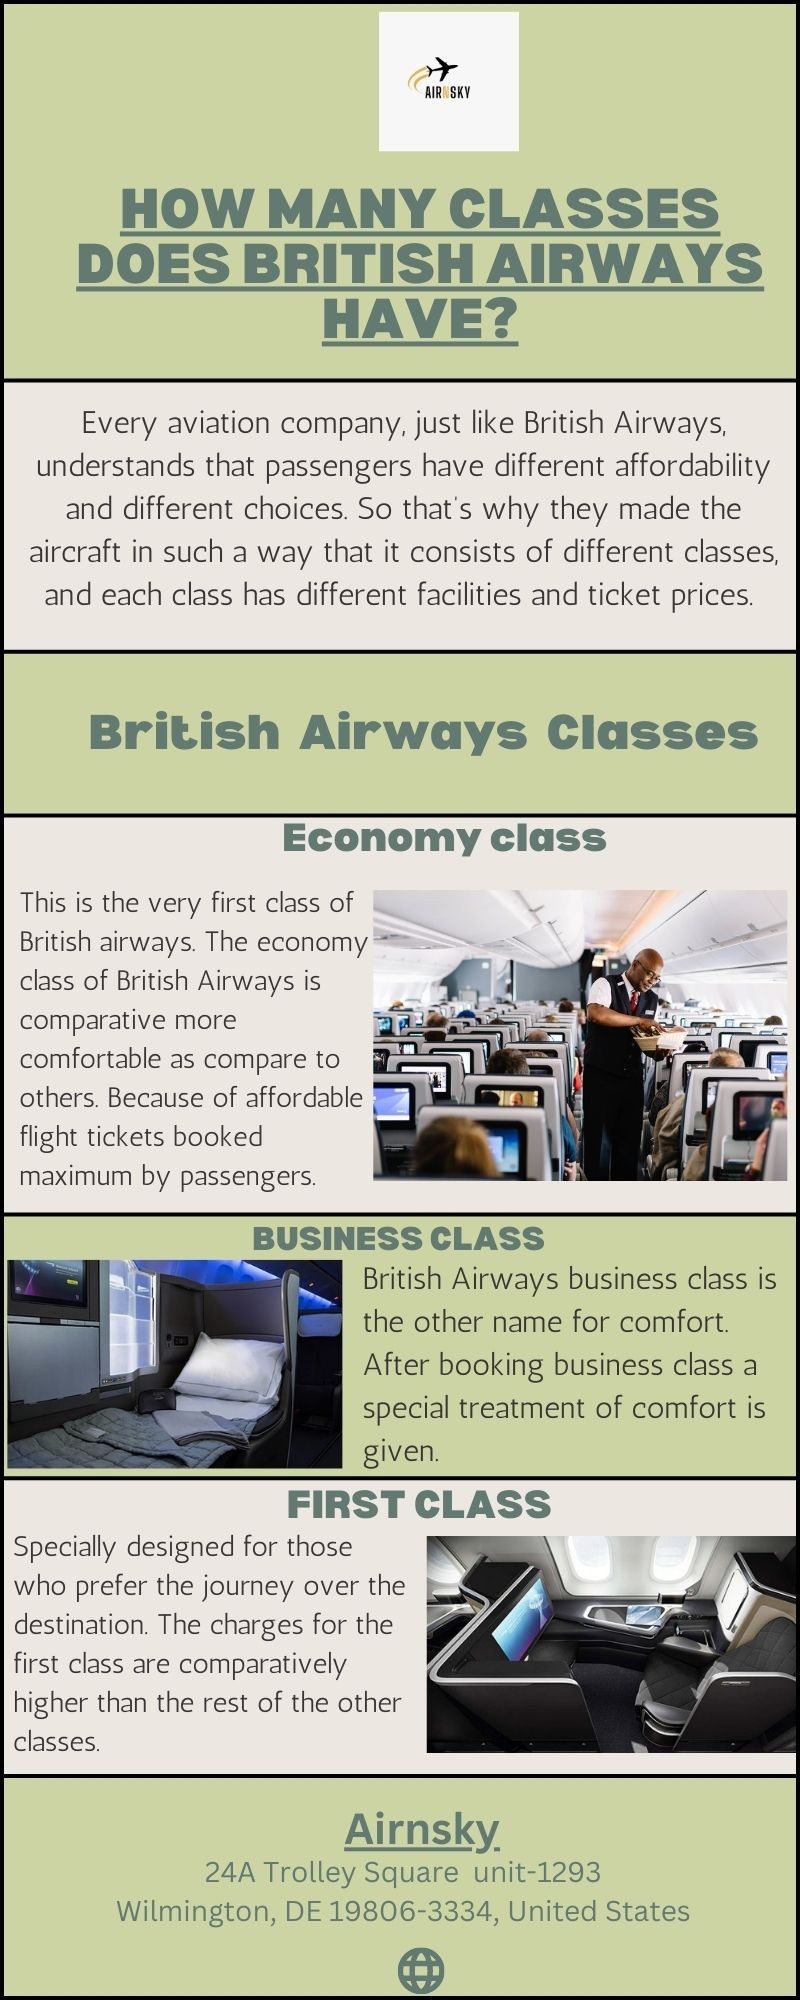 How Many Classes Does British Airways Have?